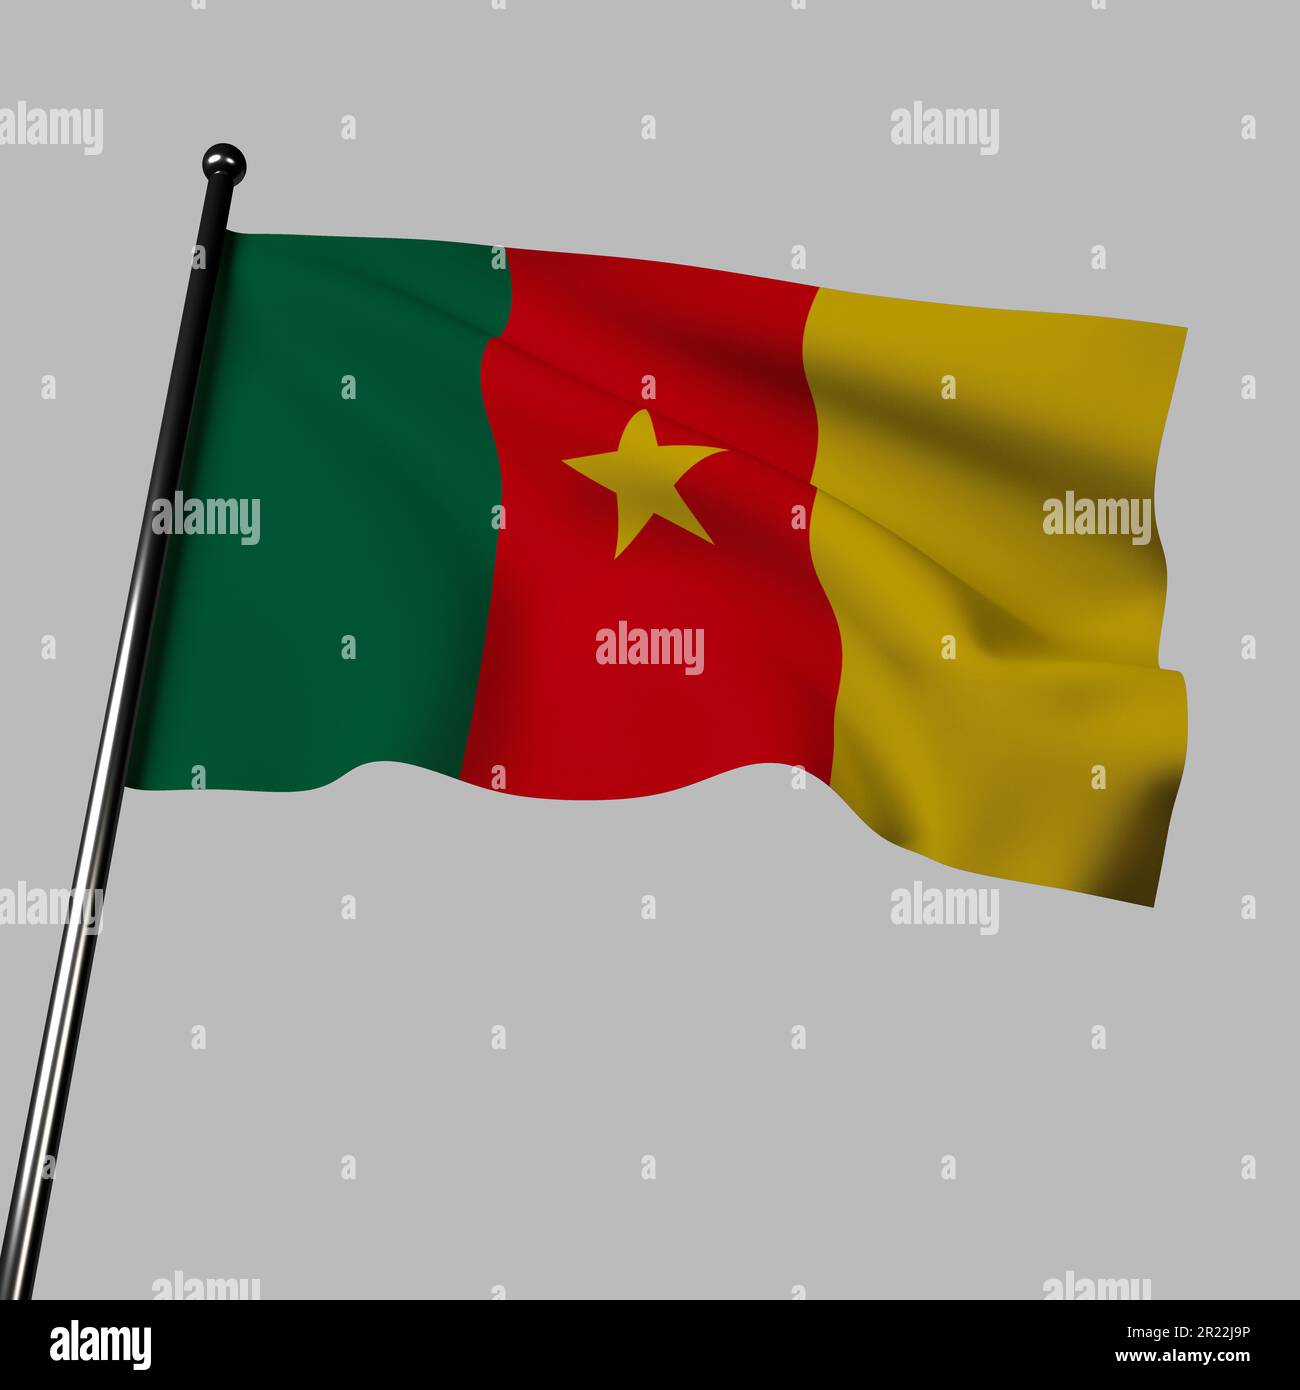 3D render of Cameroon flag on gray background. Green, red, and yellow stripes with central star symbolize unity. Central African country known for div Stock Photo